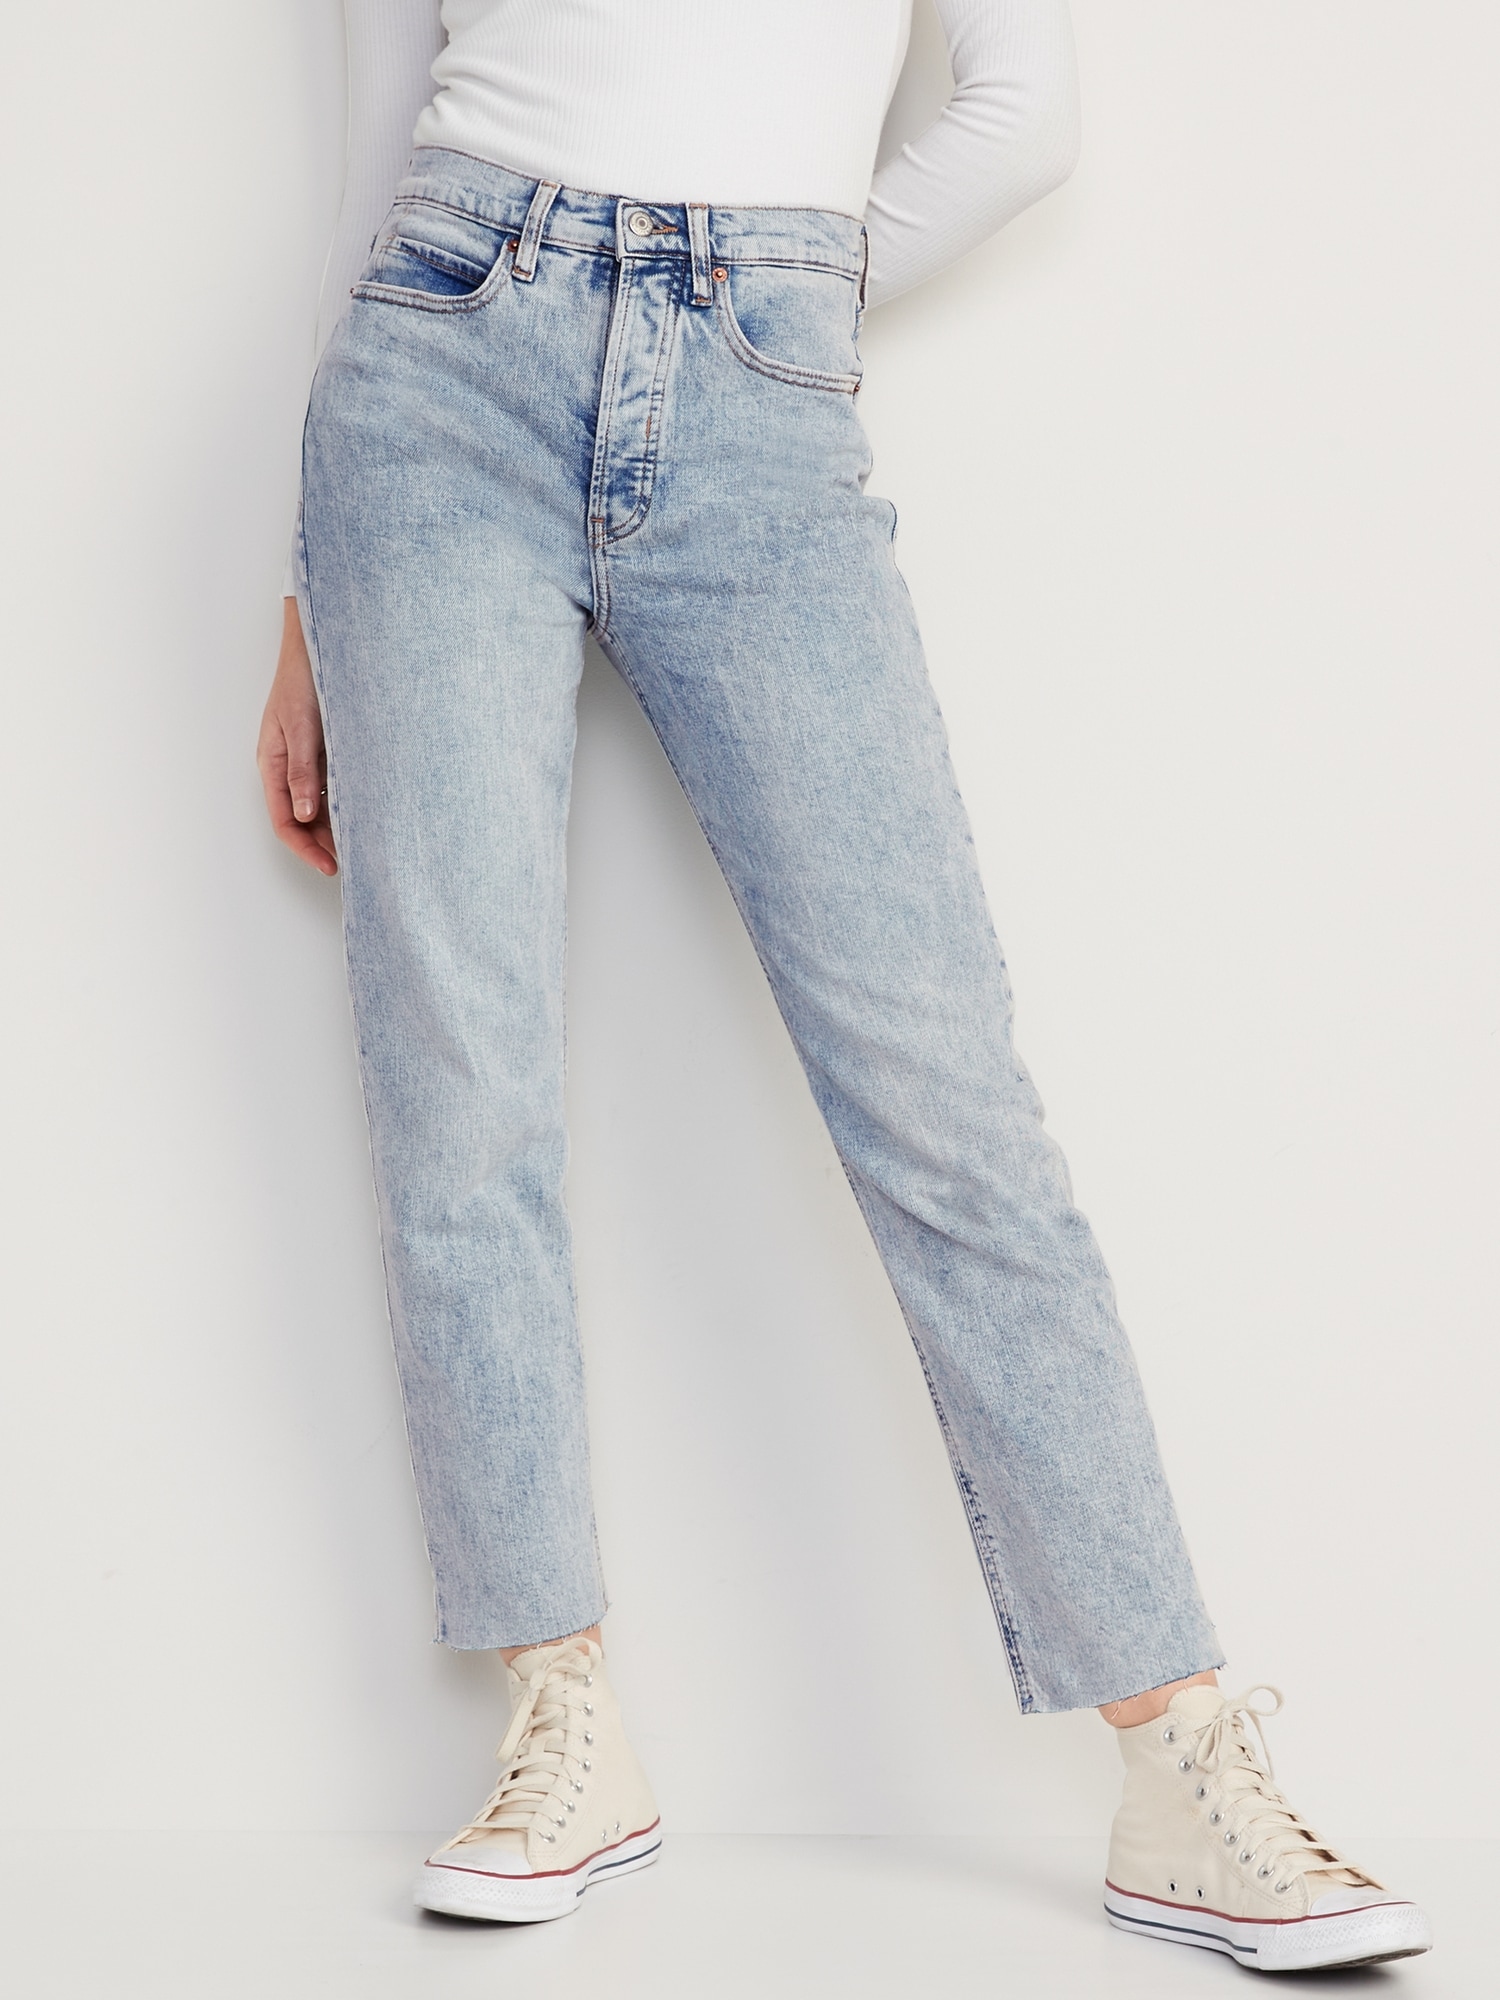 DIY Raw Hem Jeans (You Can Do It!) - See (Anna) Jane.